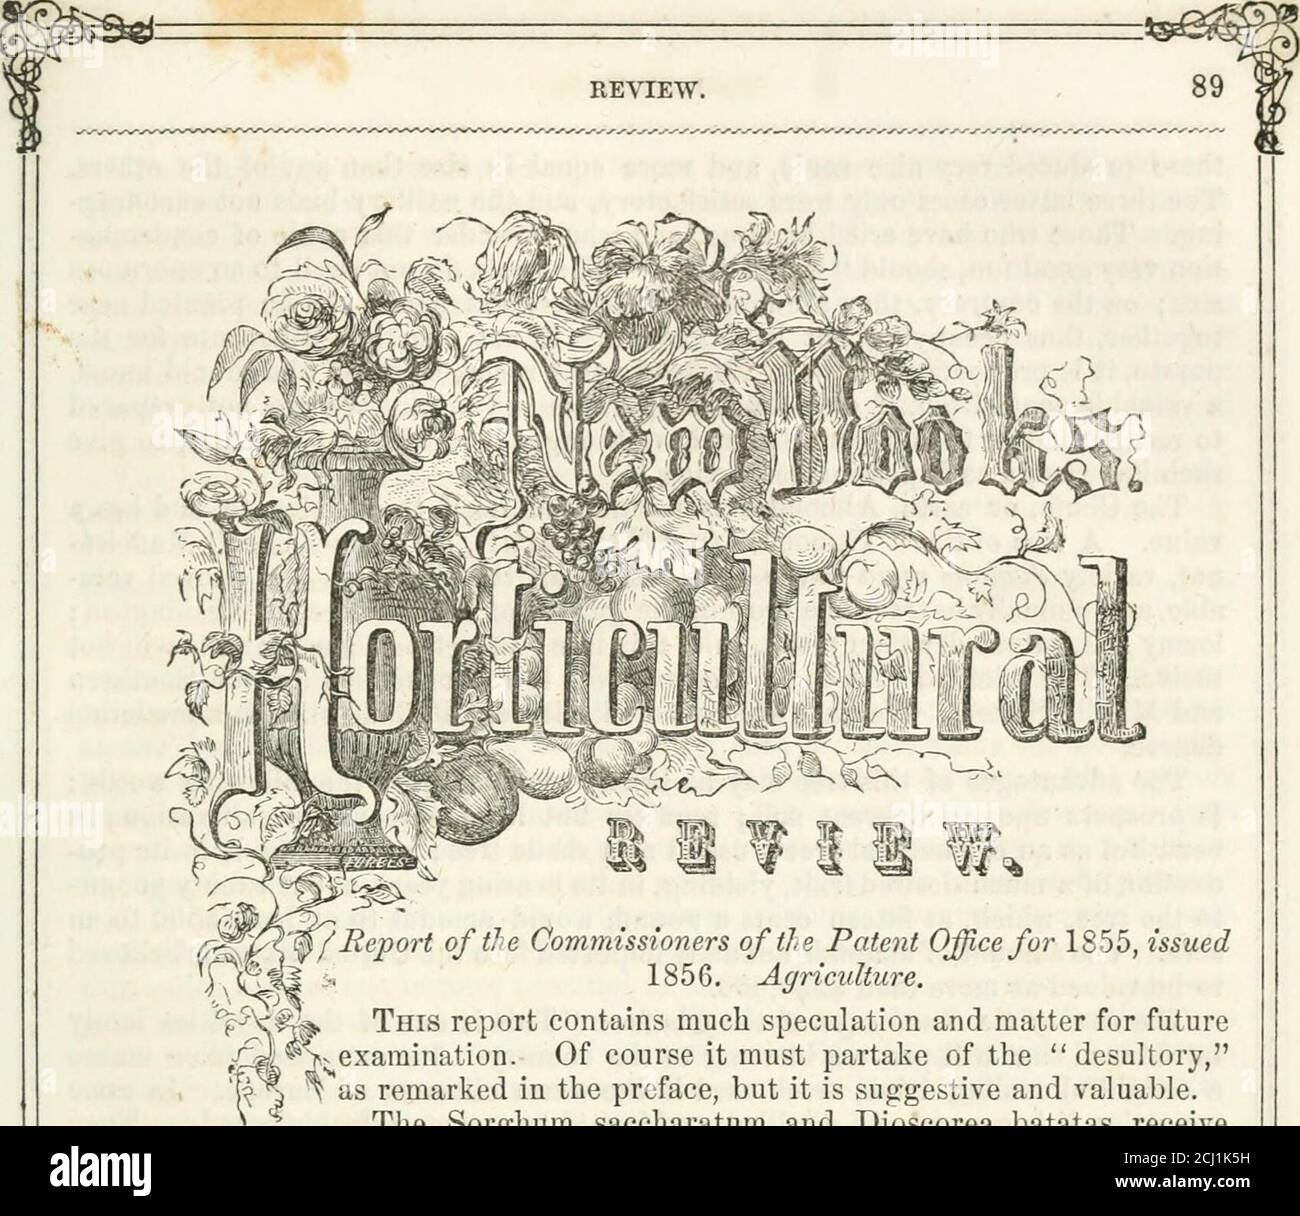 . The Horticulturist and journal of rural art and rural taste . f Report of the Commissioners of the Patent Office for 1855, issued1856. Agriculture. This report contains much speculation and matter for futureexamination. Of course it must partake of the desultory,as remarked in the preface, but it is suggestive and valuable.The Sorghum saccharatum and Dioscorea batatas receivehigh praise—perhaps not less than they deserve, though, with regard to the latter,sufficient time has not elapsed to test its value, and many who have unhesitatinglycondemned it, have unfortunately purchased the wrong de Stock Photo